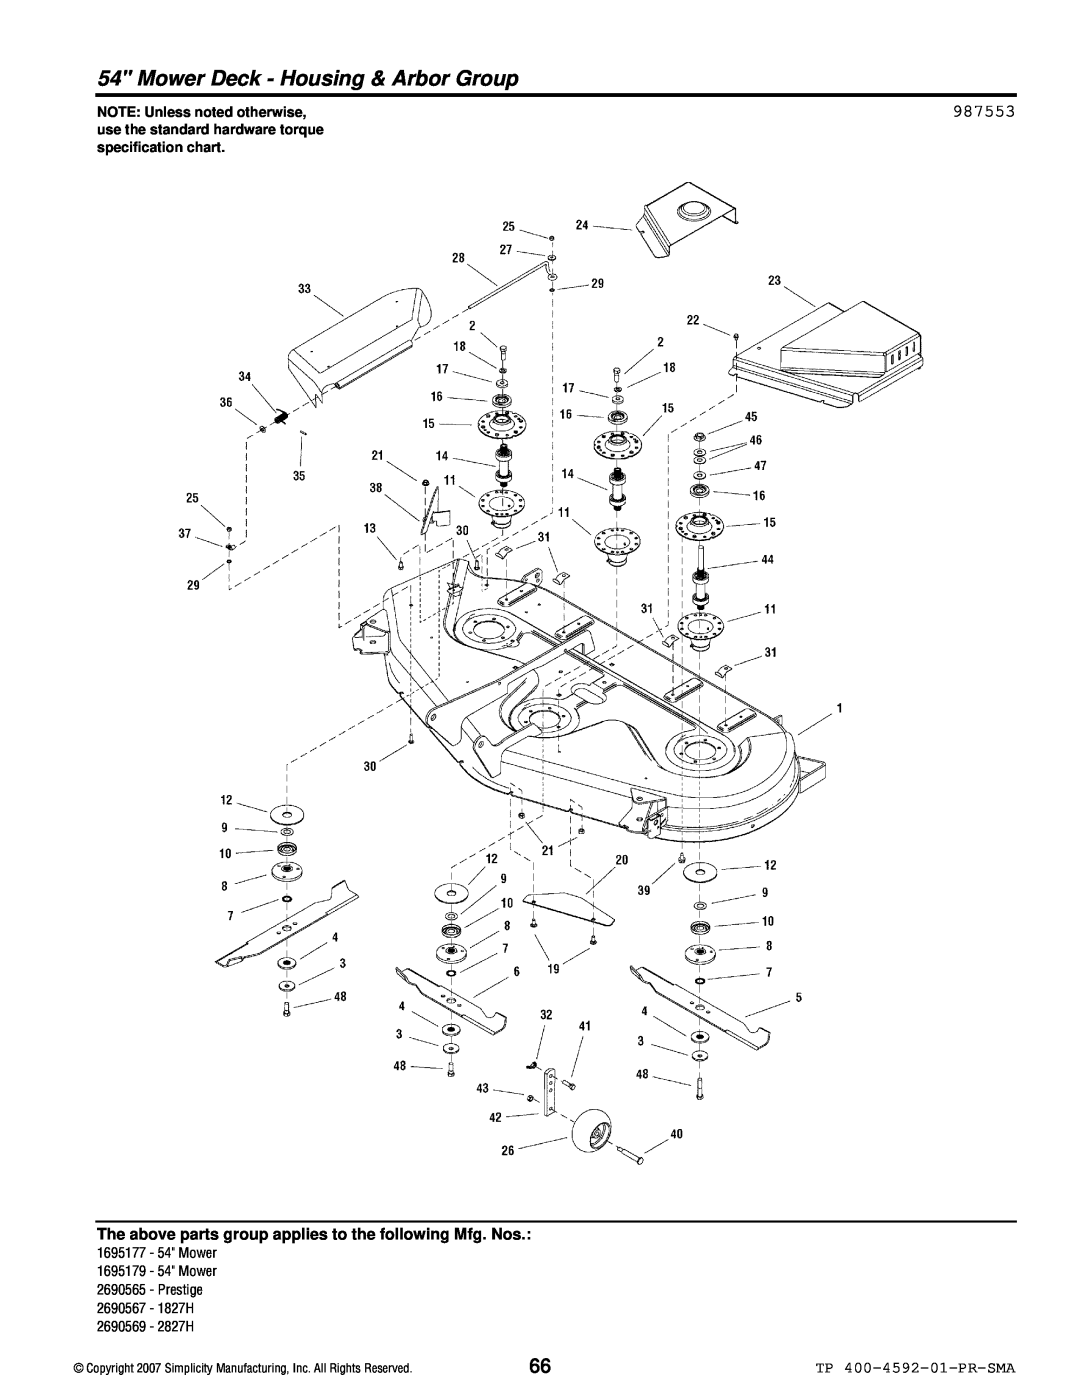 Simplicity 1800 Series Mower Deck - Housing & Arbor Group, 987553, TP 400-4592-01-PR-SMA, NOTE: Unless noted otherwise 